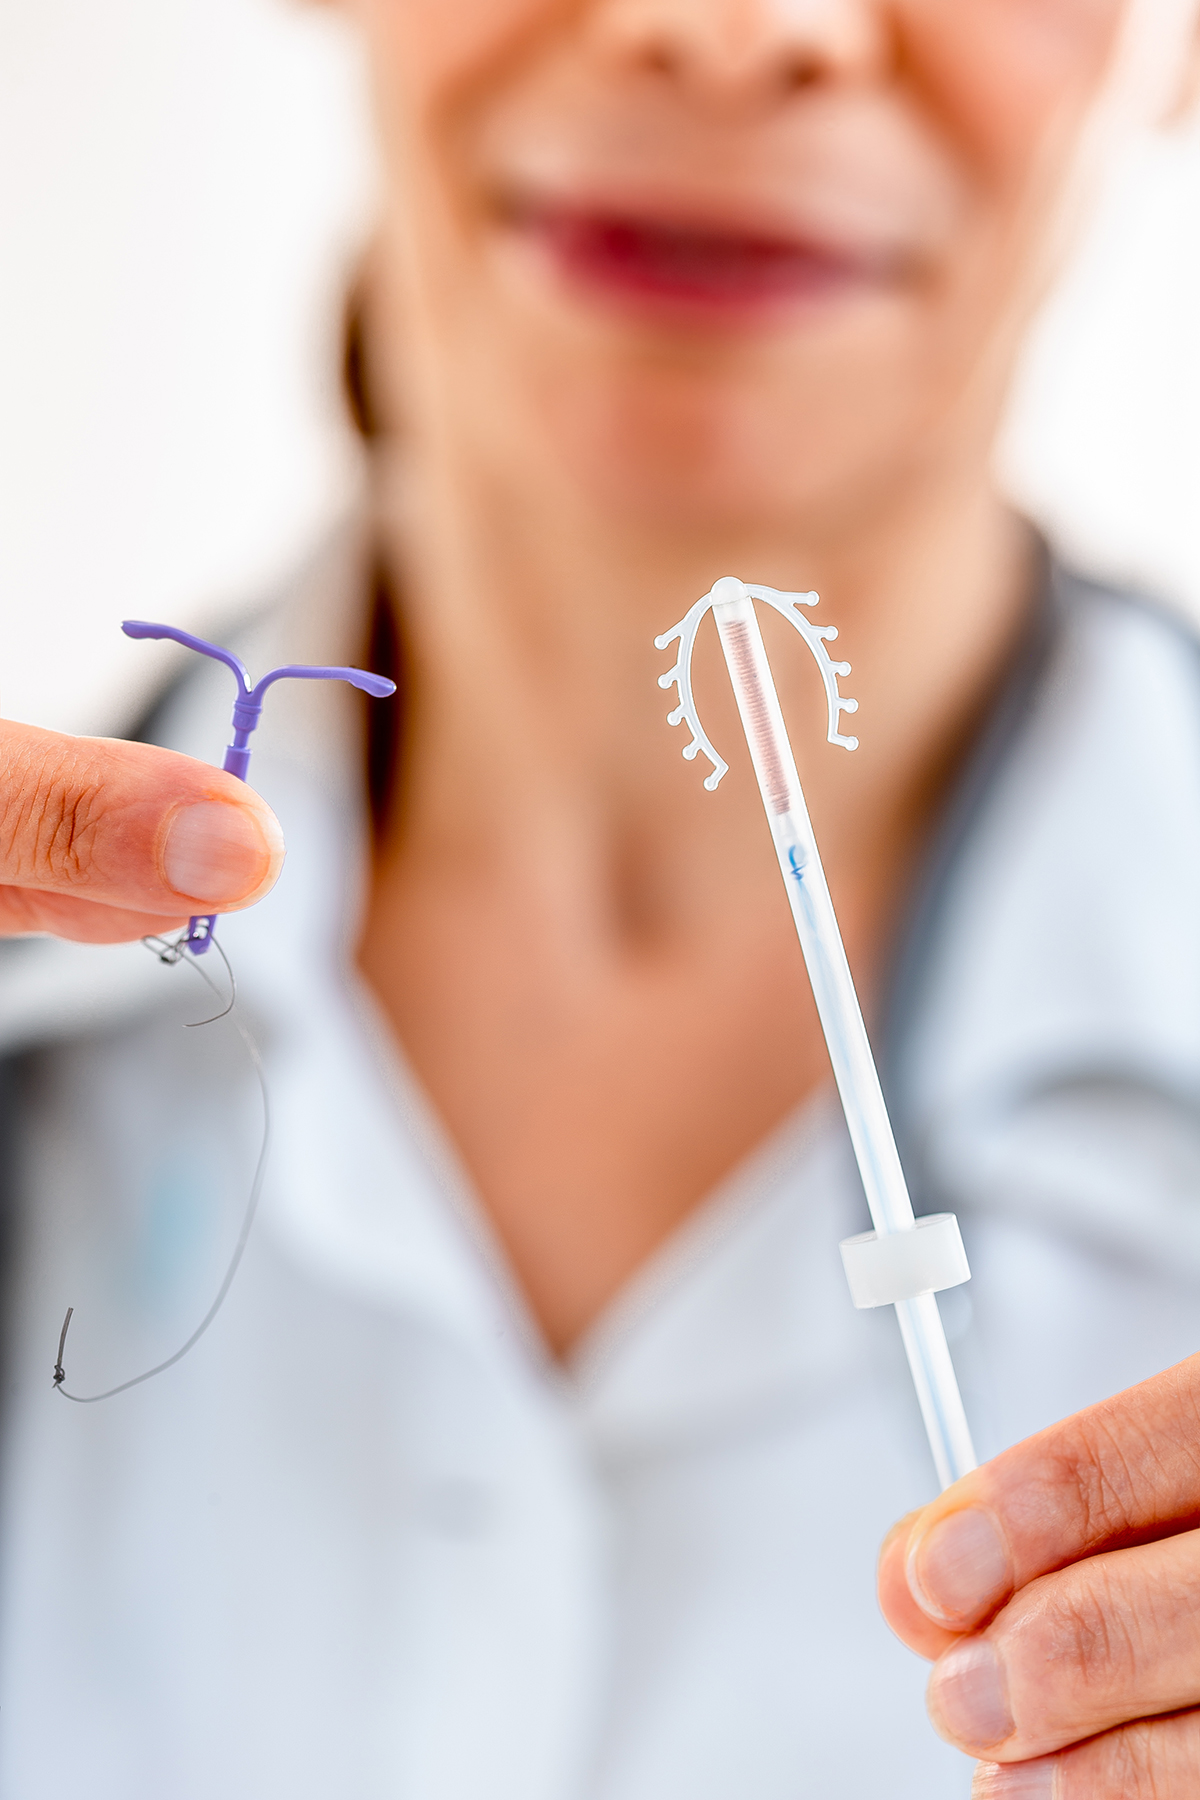 Advice before fitting an IUD or IUS